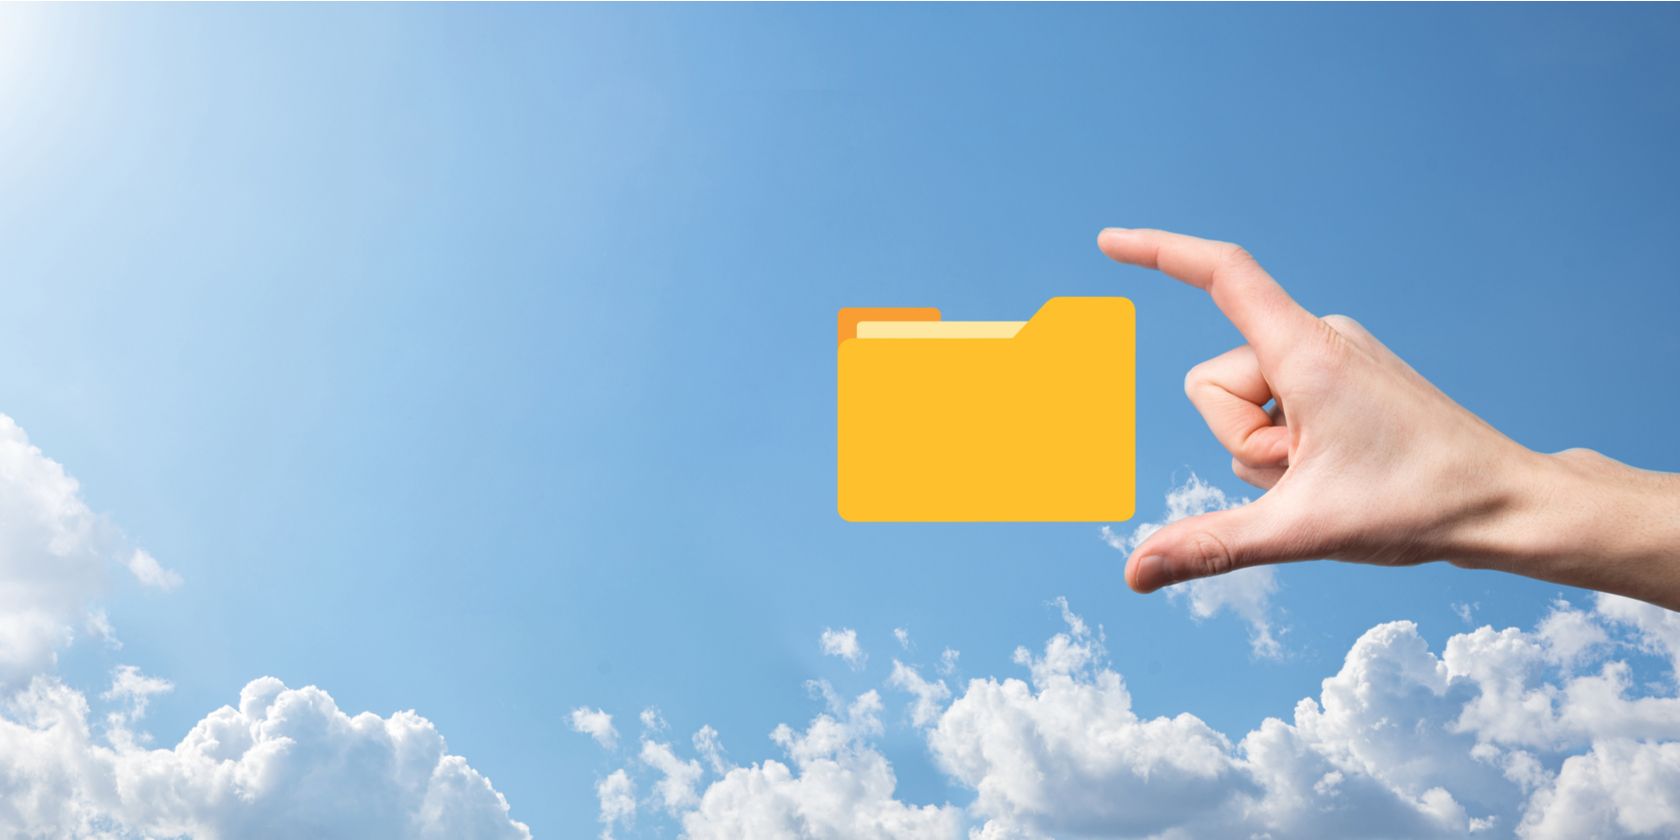 Hand about to grasp folder icon with fingers on a sky background